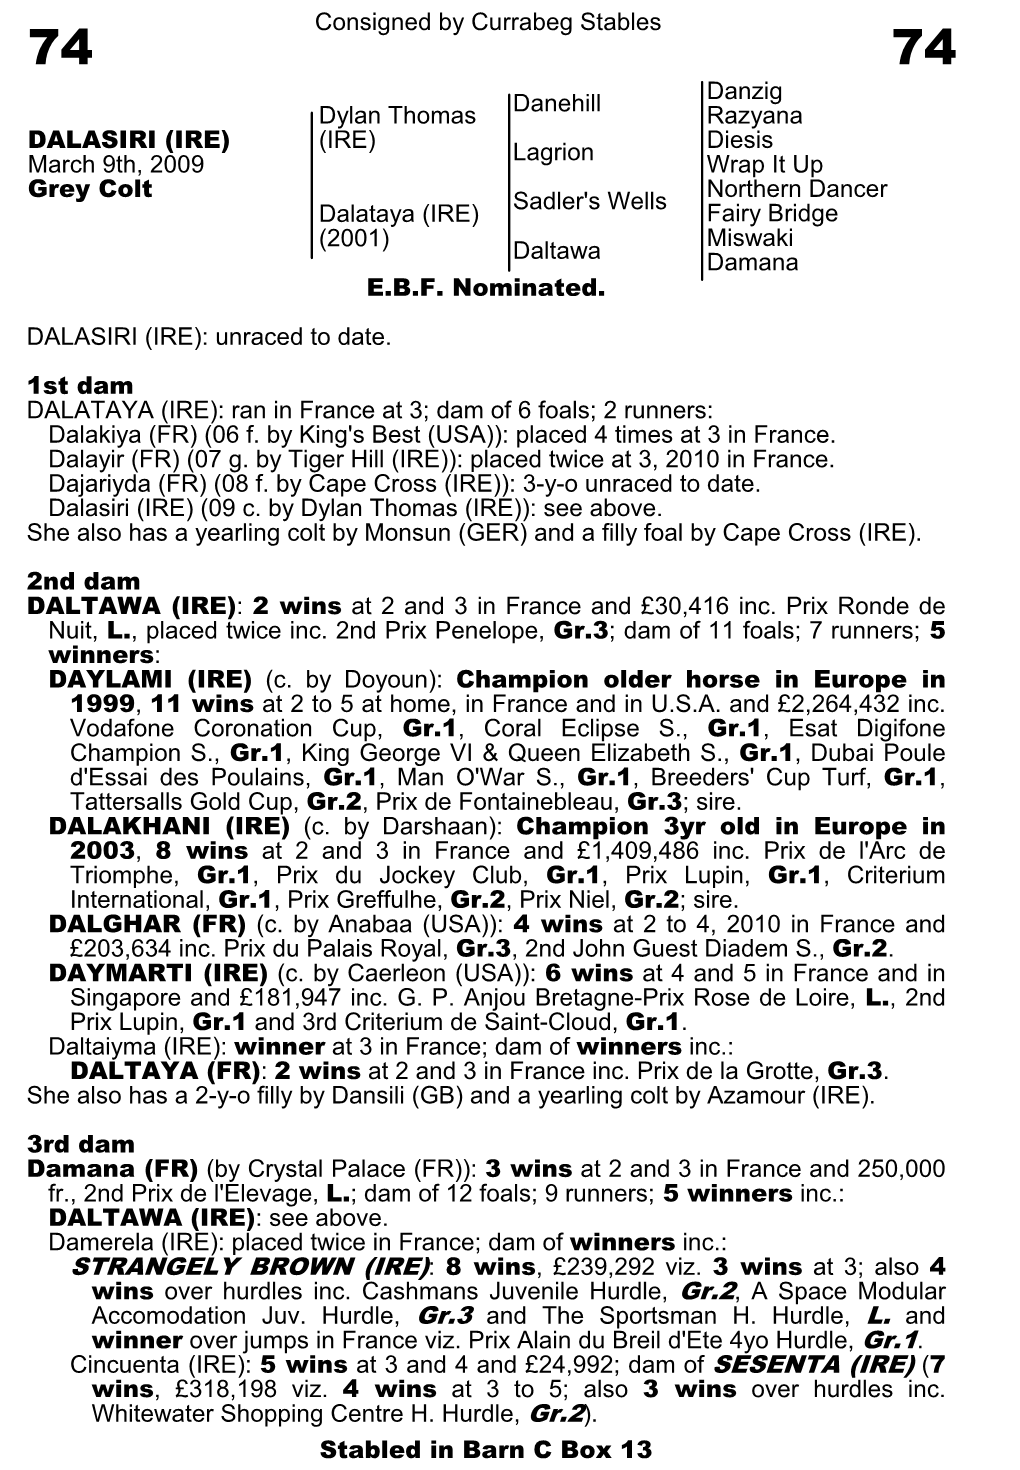 Consigned by Currabeg Stables Danehill Danzig Razyana